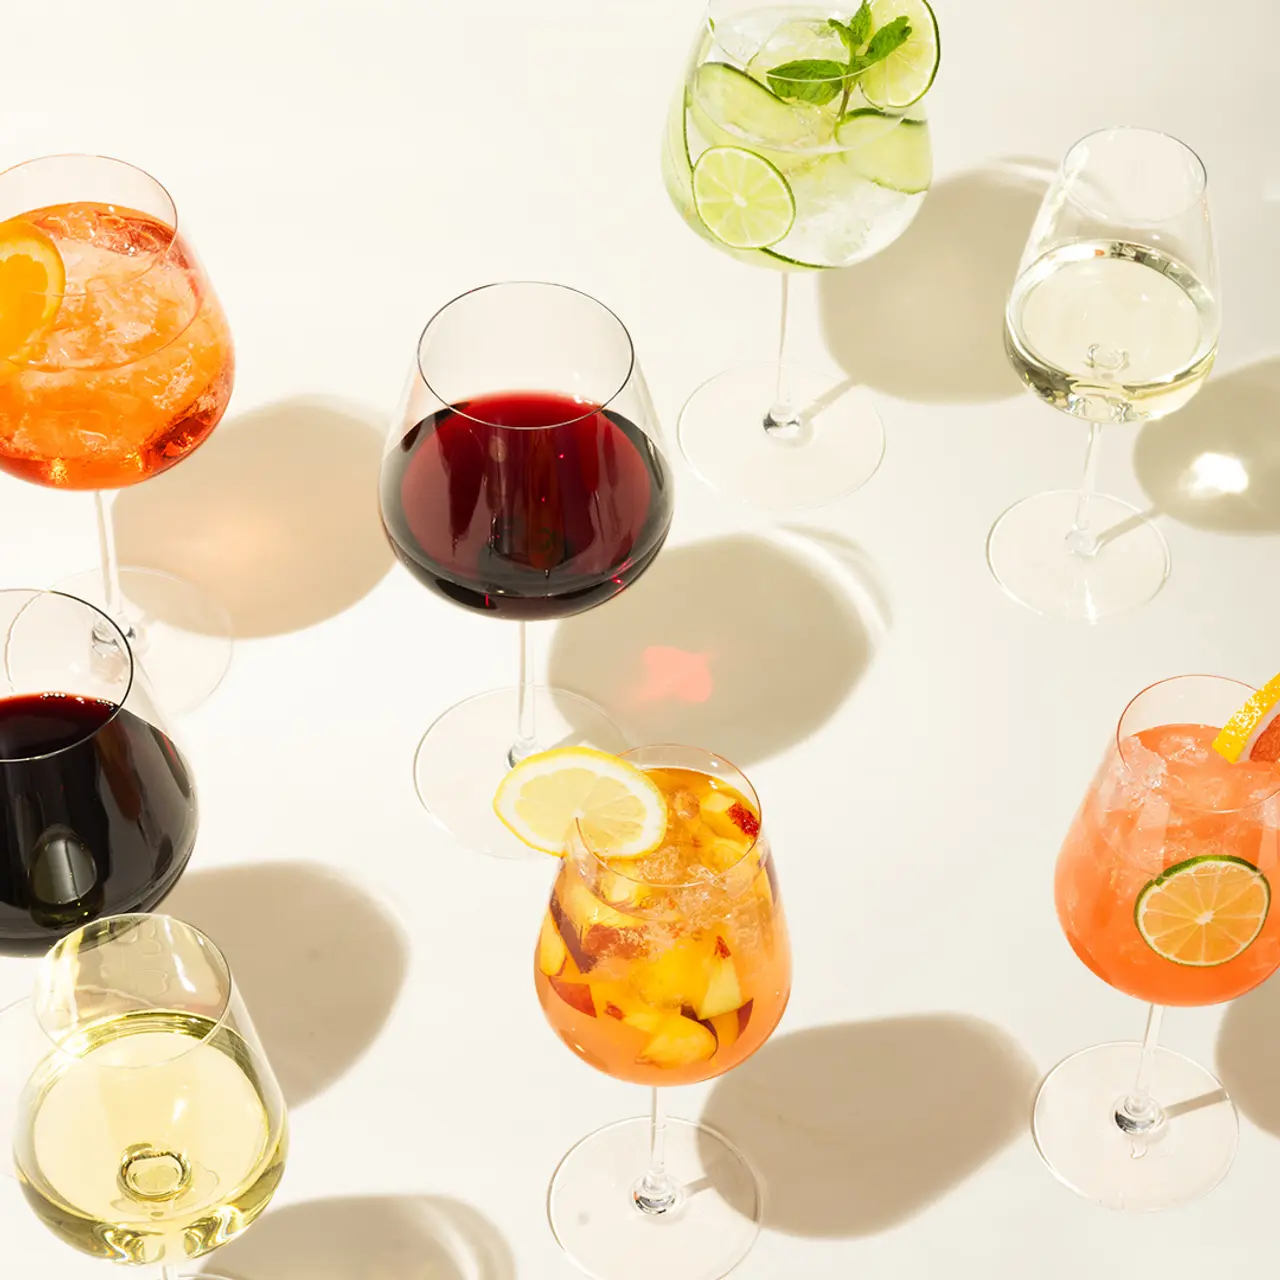 Various glasses of colorful beverages, including wine and cocktails, are arranged neatly, casting shadows on a bright surface.